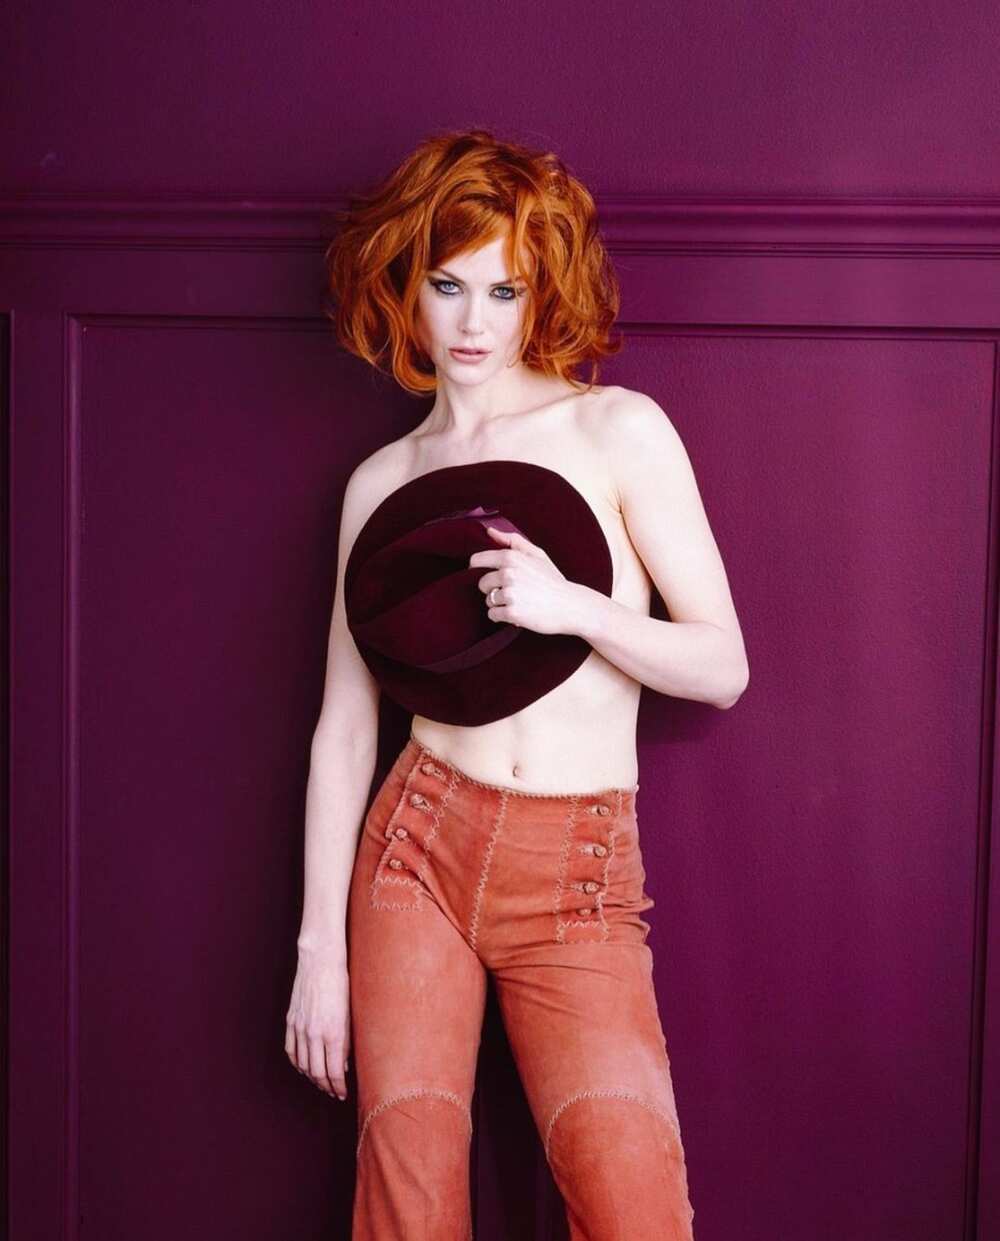 clare sinclair recommends Pics Of Hot Red Heads